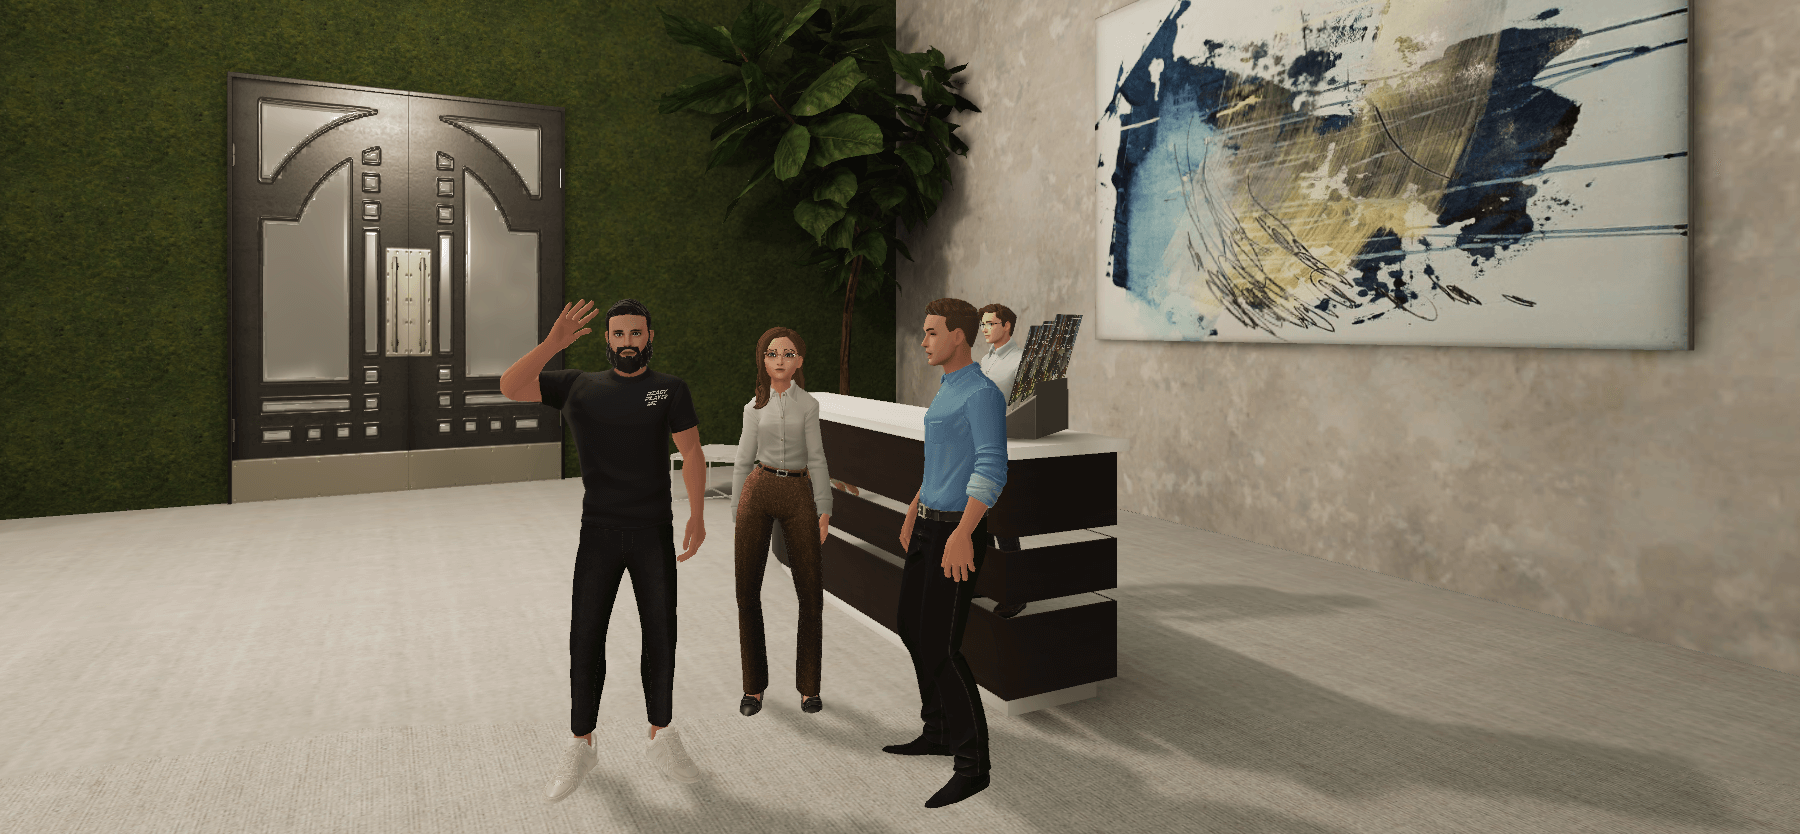 ReScoialize Metaverse Meeting Platform, virtual event space, and online office with three avatars greeting guests, waving towards the viewer Plans and pricing, this image highlights the ReSocialize Free offering. Virtual event free trial.